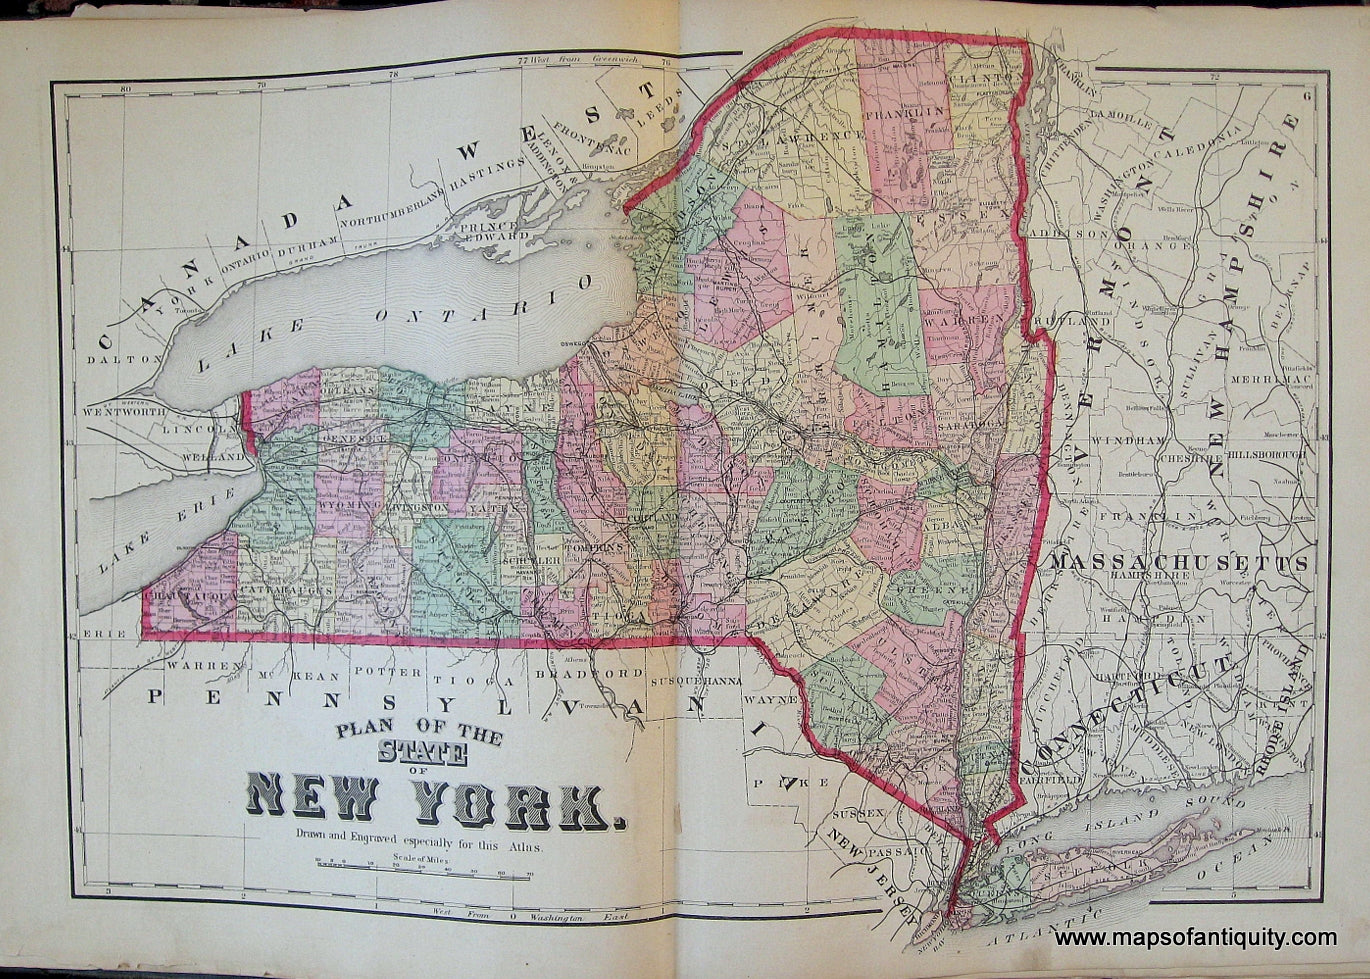 Antique-Hand-Colored-Map-Plan-of-the-State-of-New-York.-United-States-Northeast-1873-Beers-Maps-Of-Antiquity